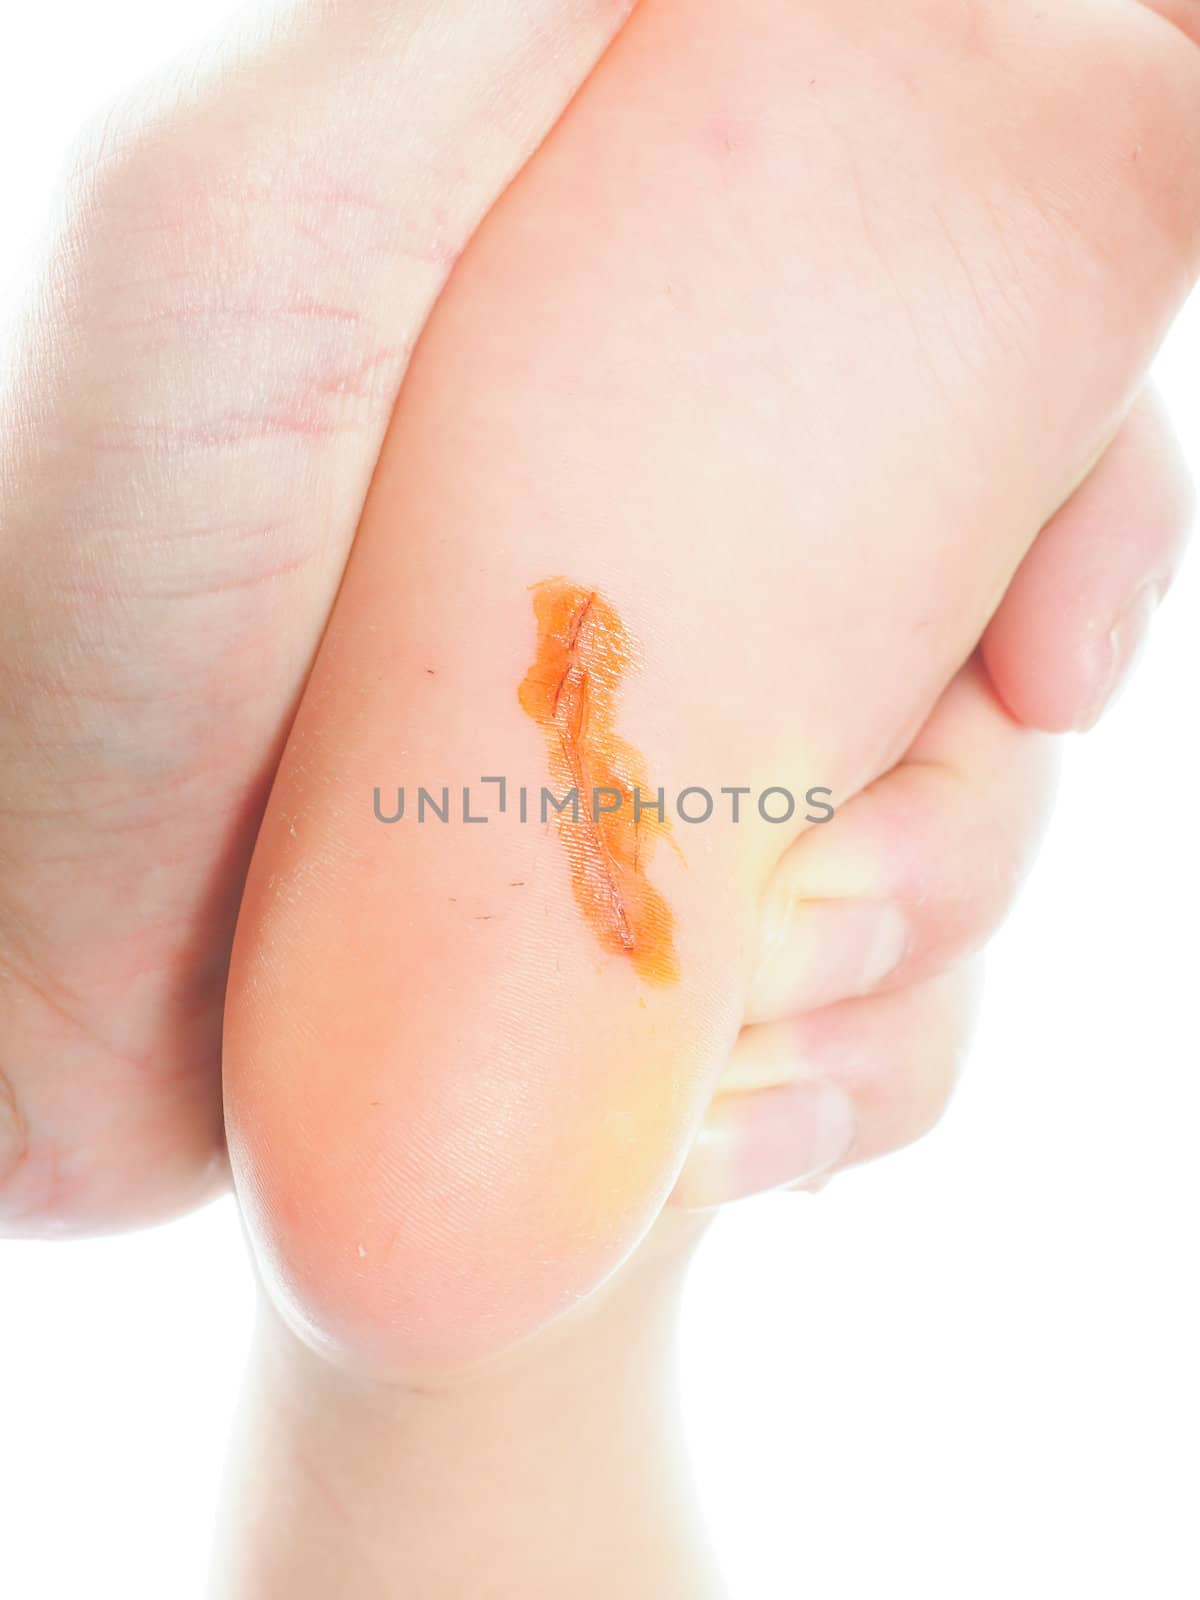 Child with a long cut under foot on heel with antiseptic, being examinated towards white